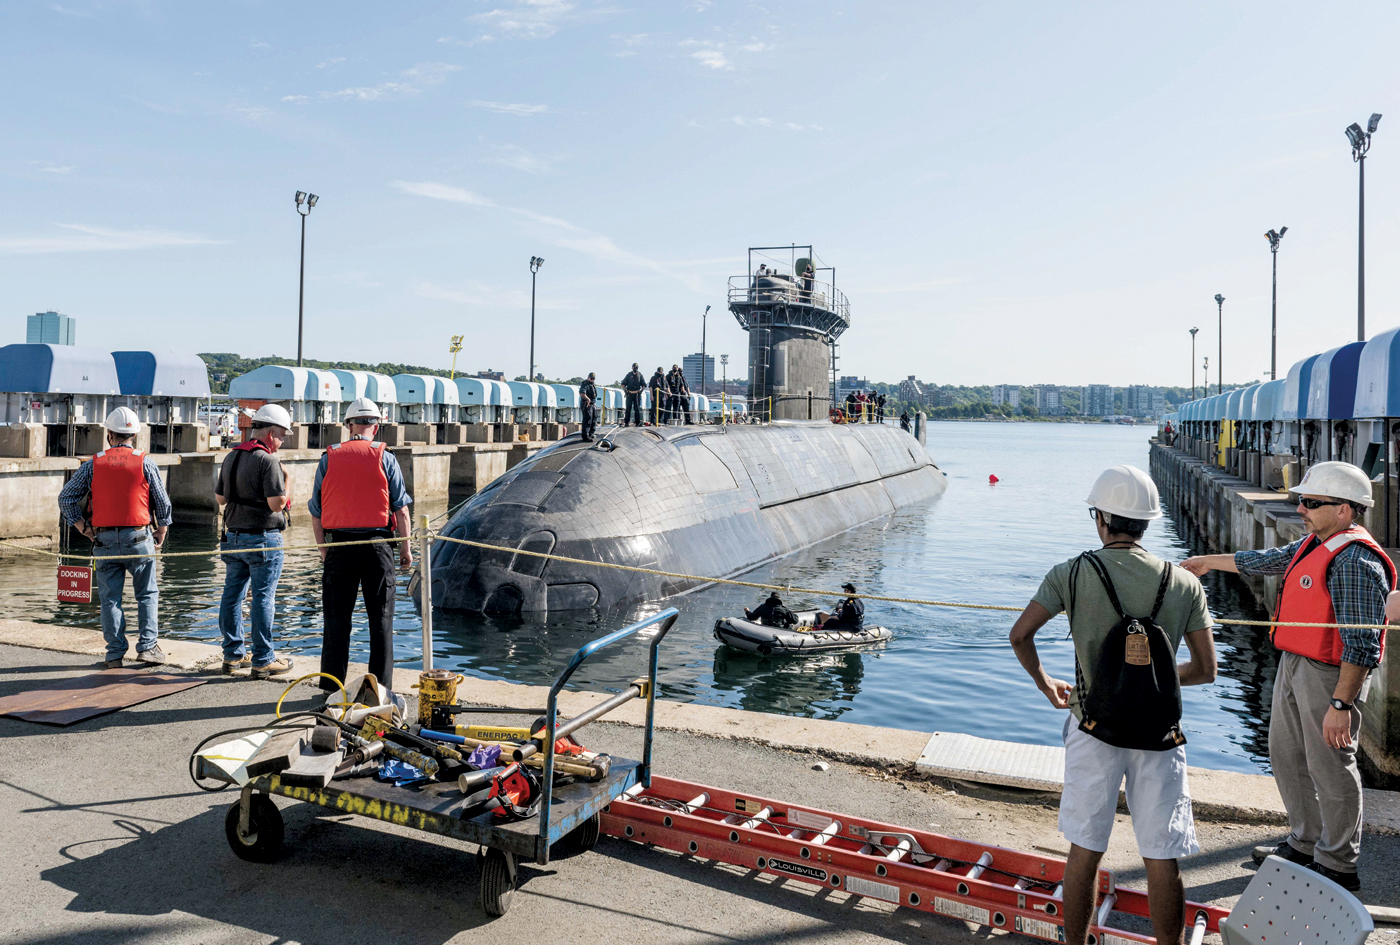 HMCS Windsor was taken out of the submarine shed at D294 and lowered into Halifax Harbour on Aug. 7.